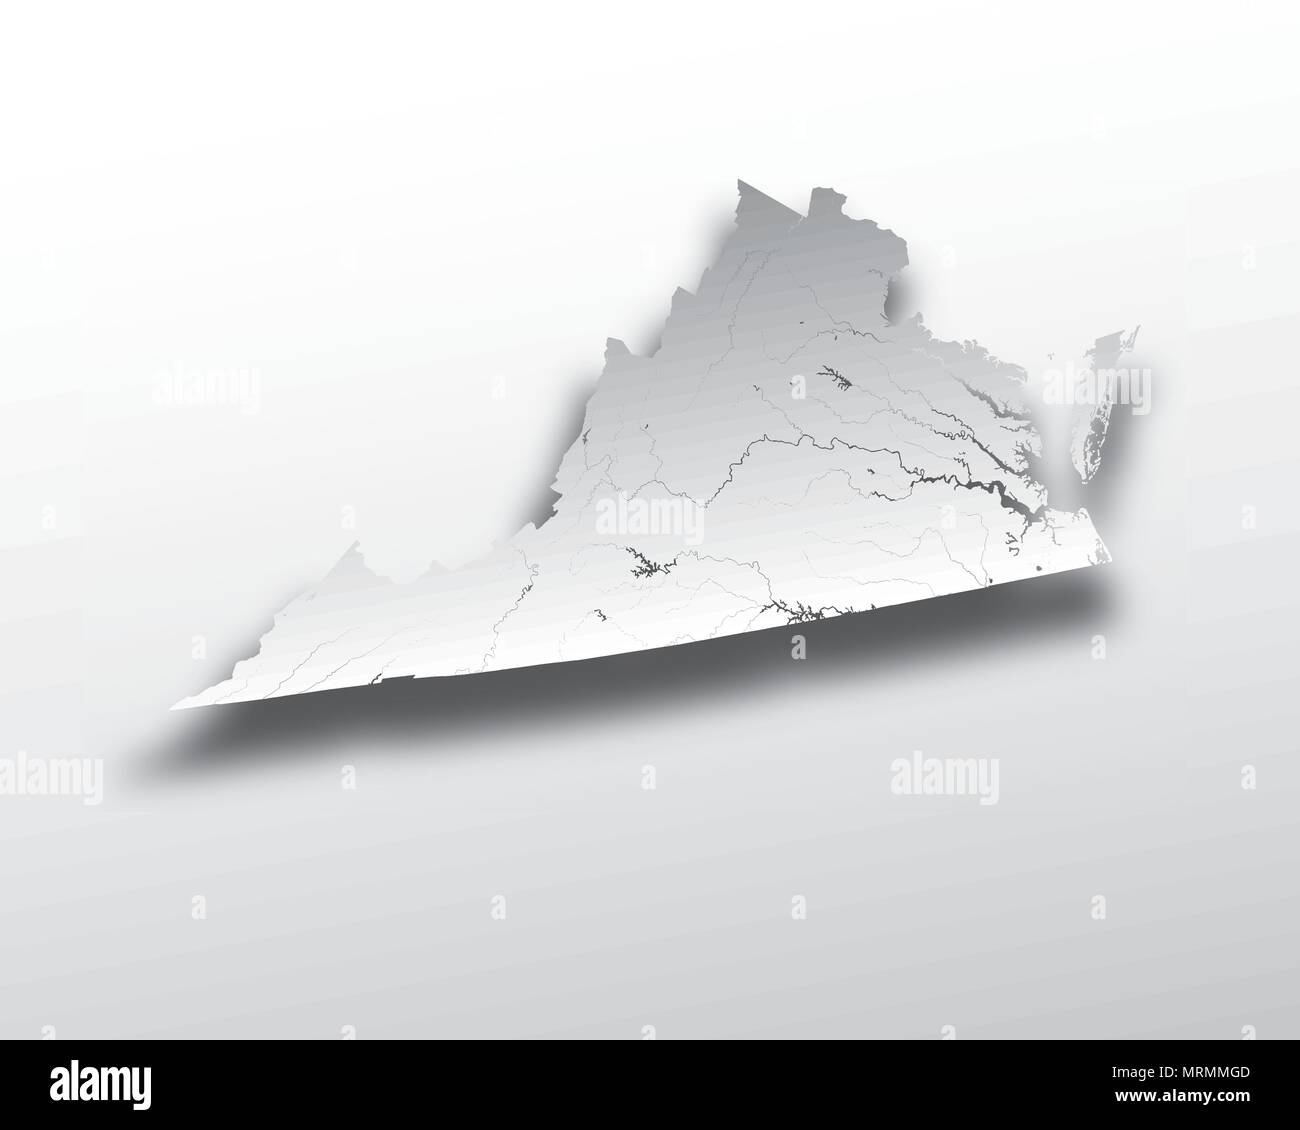 U.S. states - map of Virginia with paper cut effect. Hand made. Rivers and lakes are shown. Please look at my other images of cartographic series - th Stock Vector